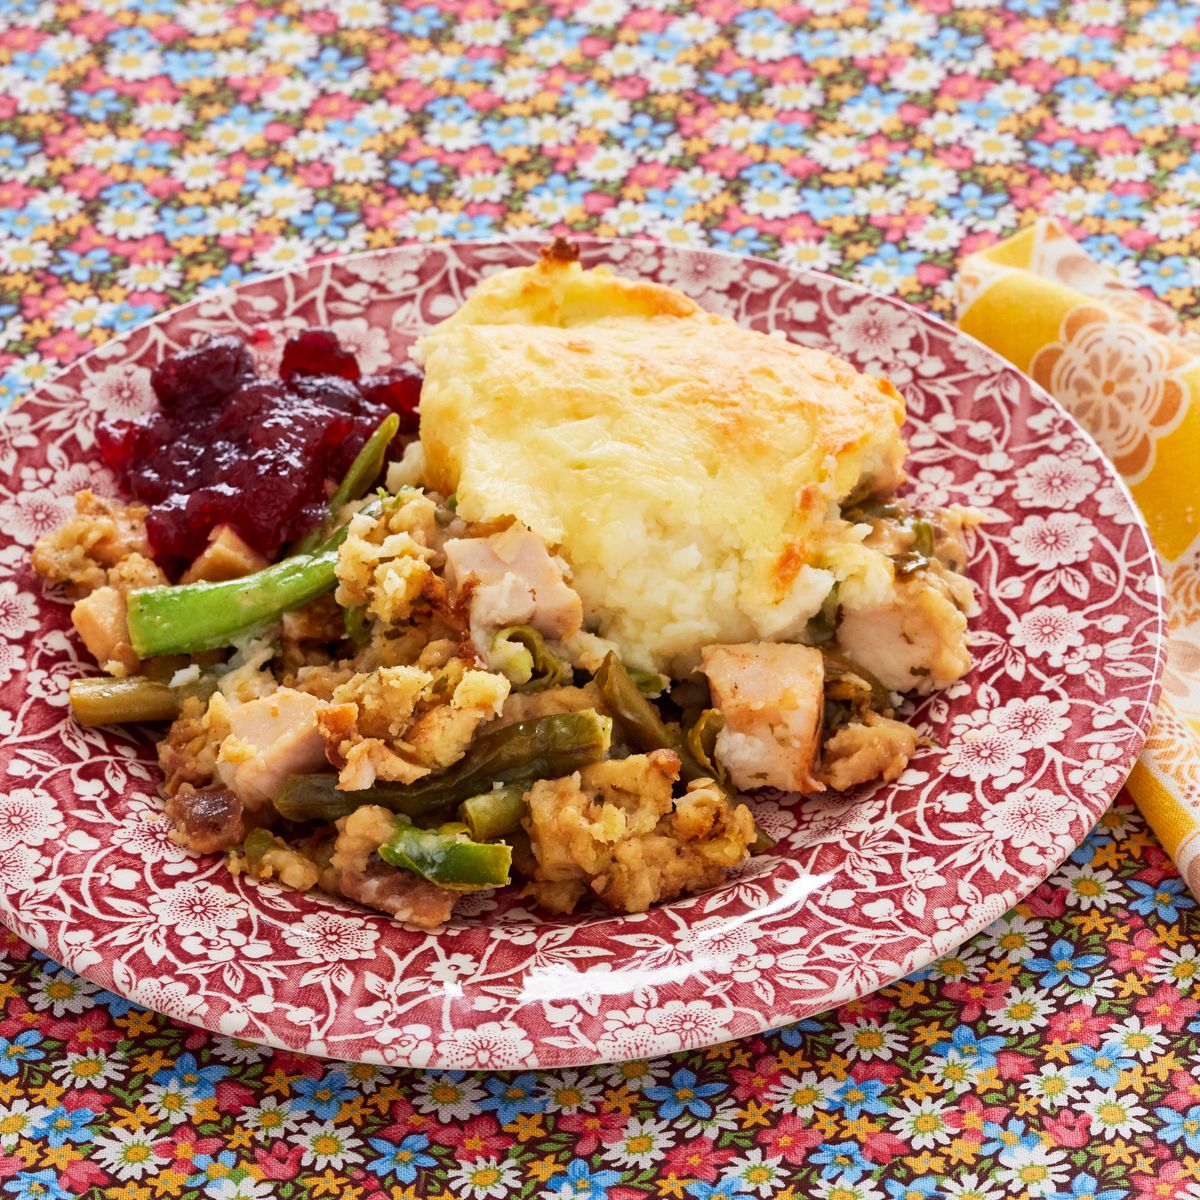 the pioneer woman's thanksgiving leftover casserole recipe